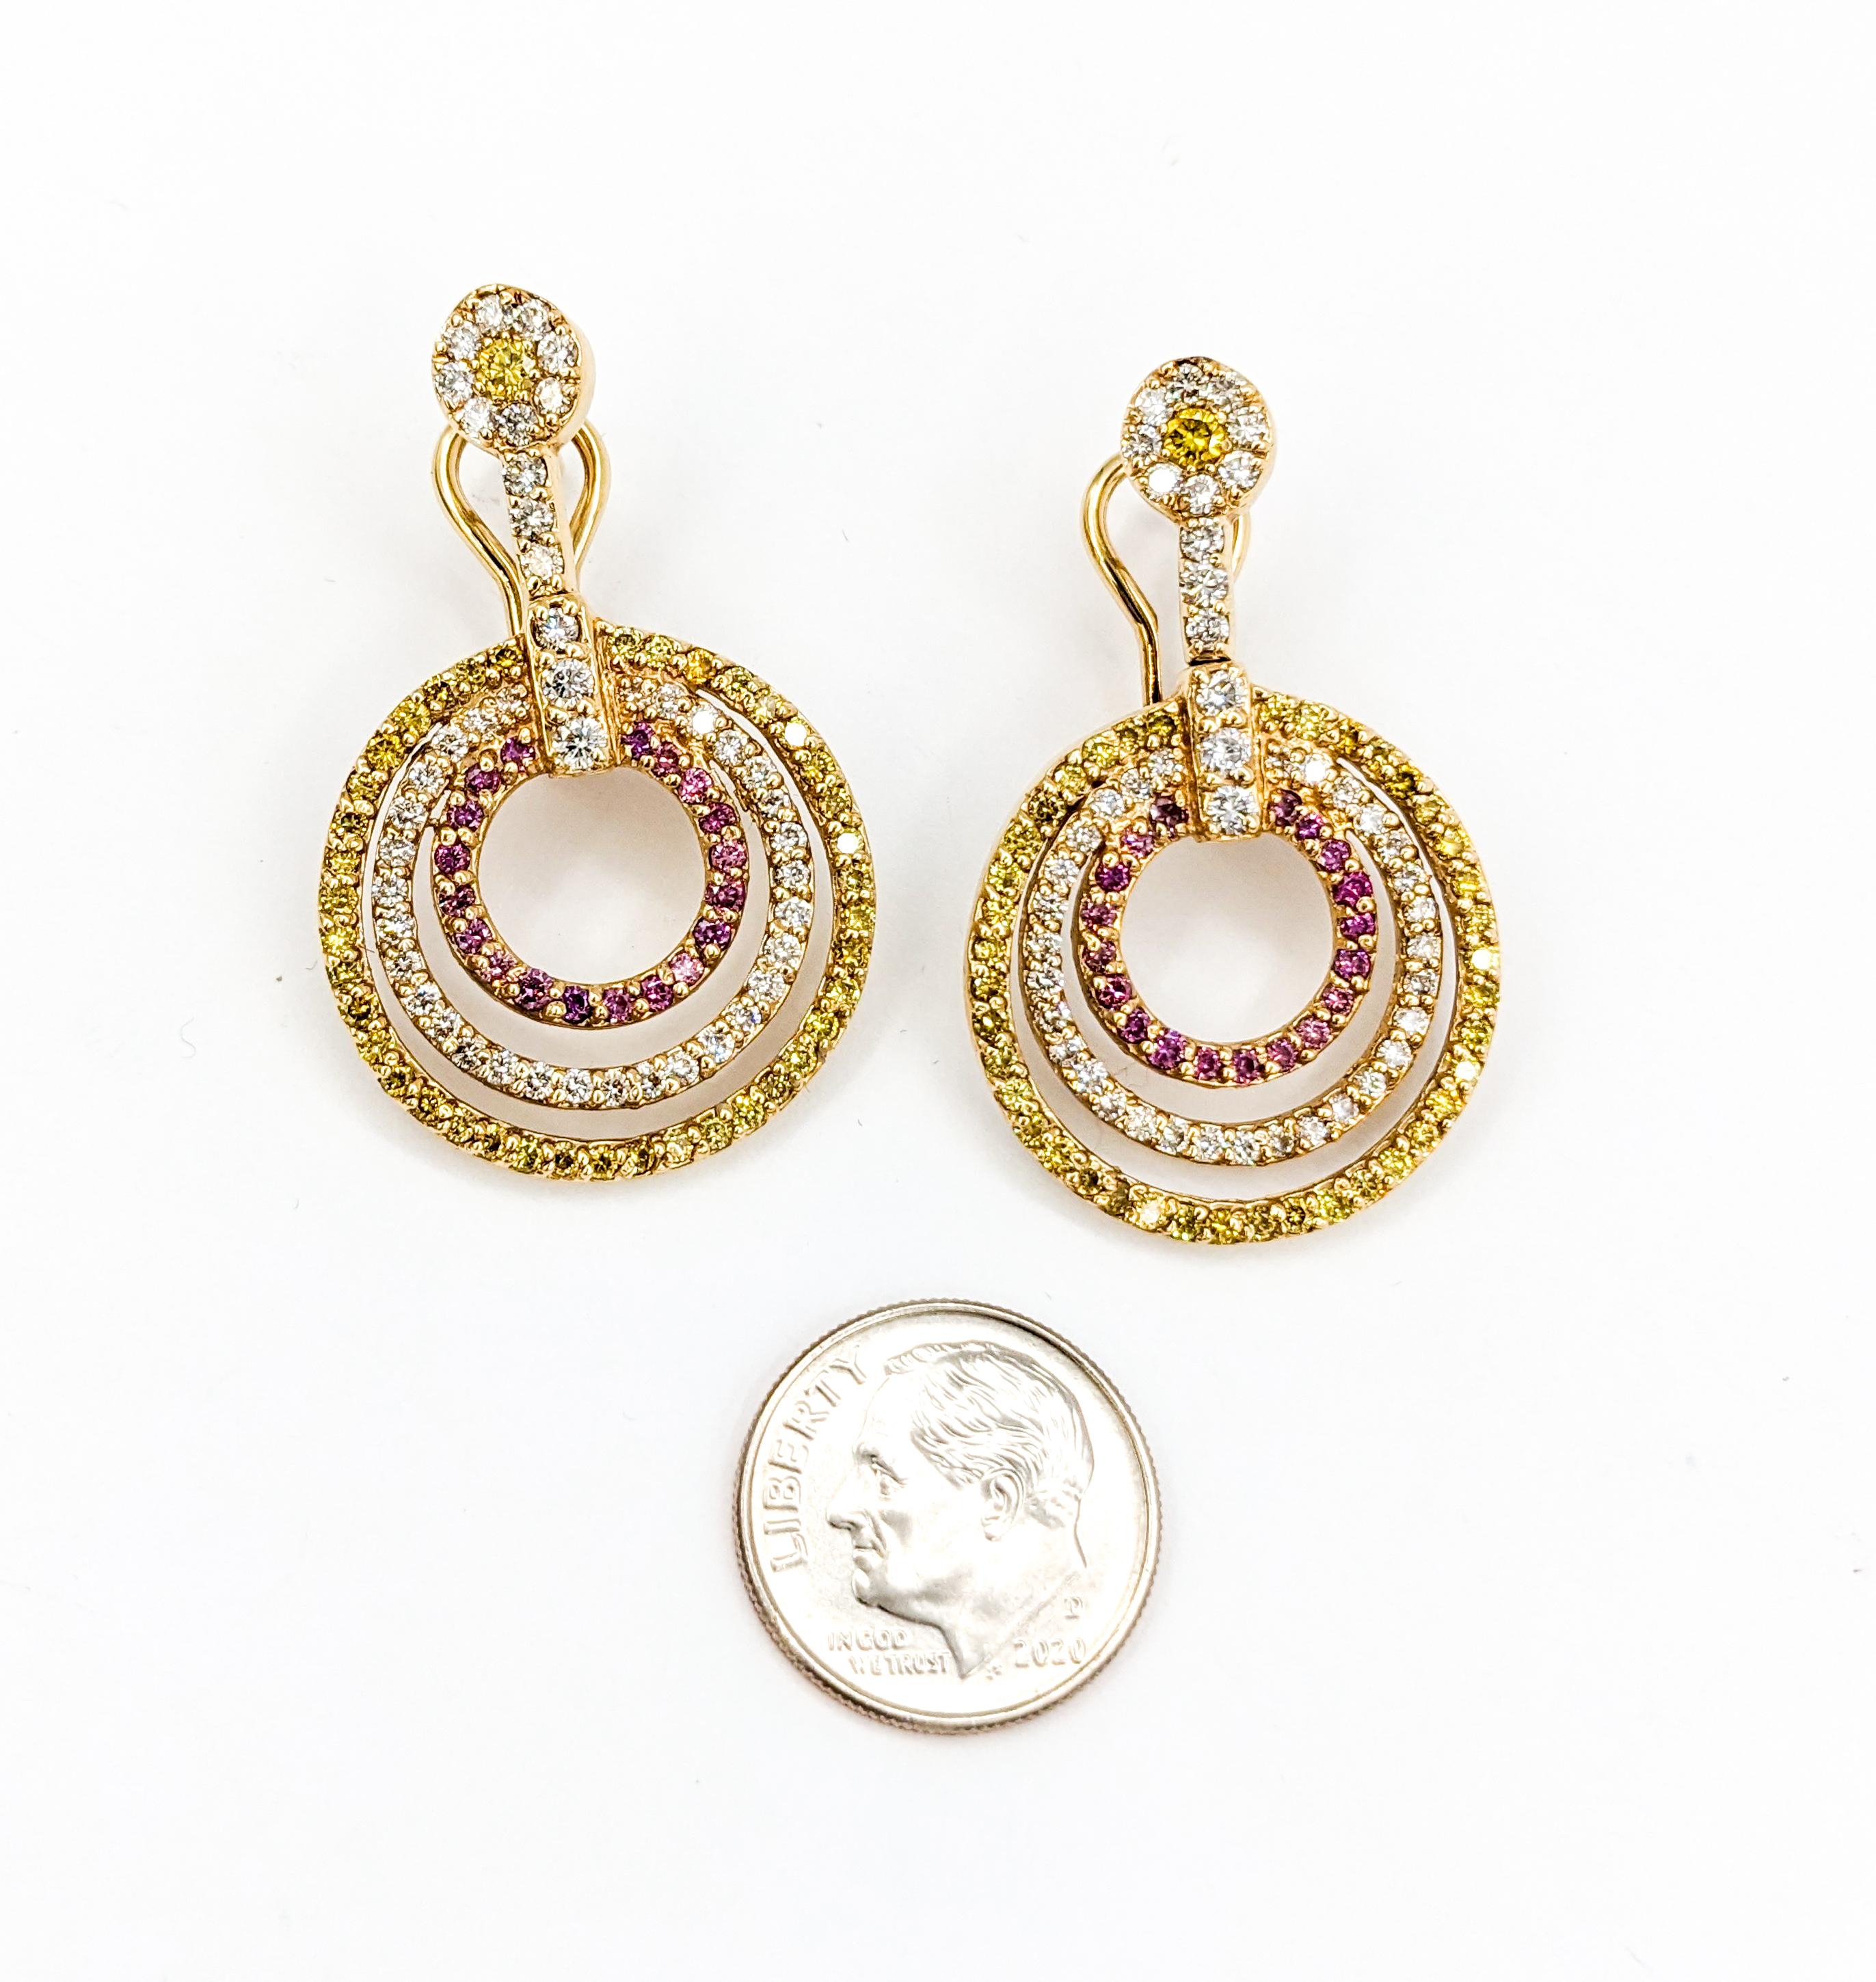 Brilliant Enhanced Color Diamond Circle Drop Omega Earrings

Step into a world of elegance with these beautiful earrings, meticulously fashioned from 14k yellow gold and graced with a remarkable 3.5ctw of round diamonds. These dazzling gems exude an